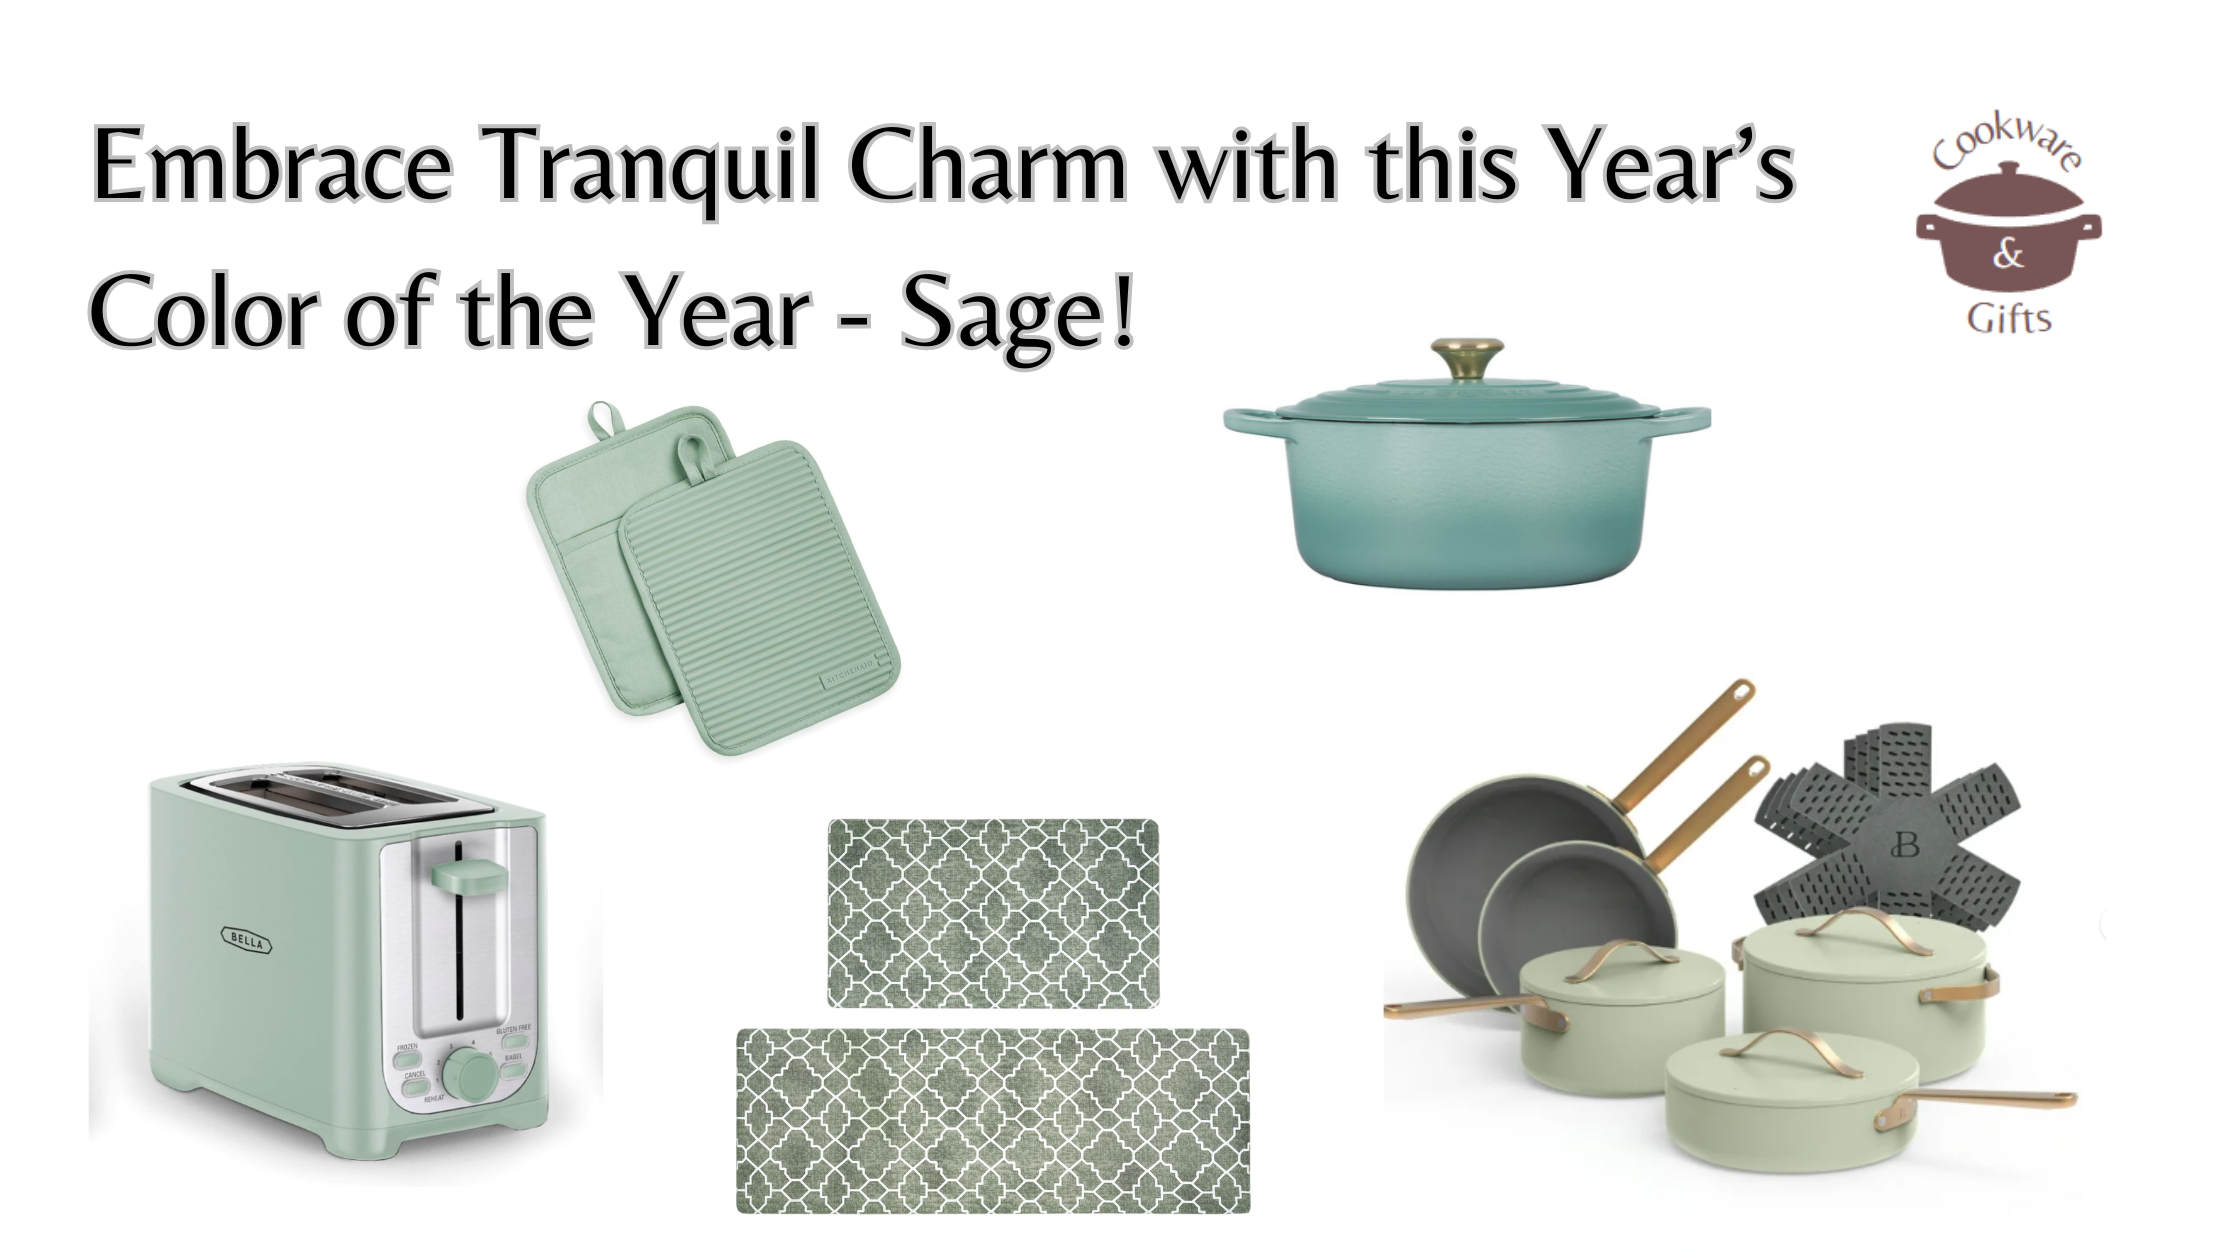 Embrace Tranquil Charm with this Year’s Color of the Year, Sage!